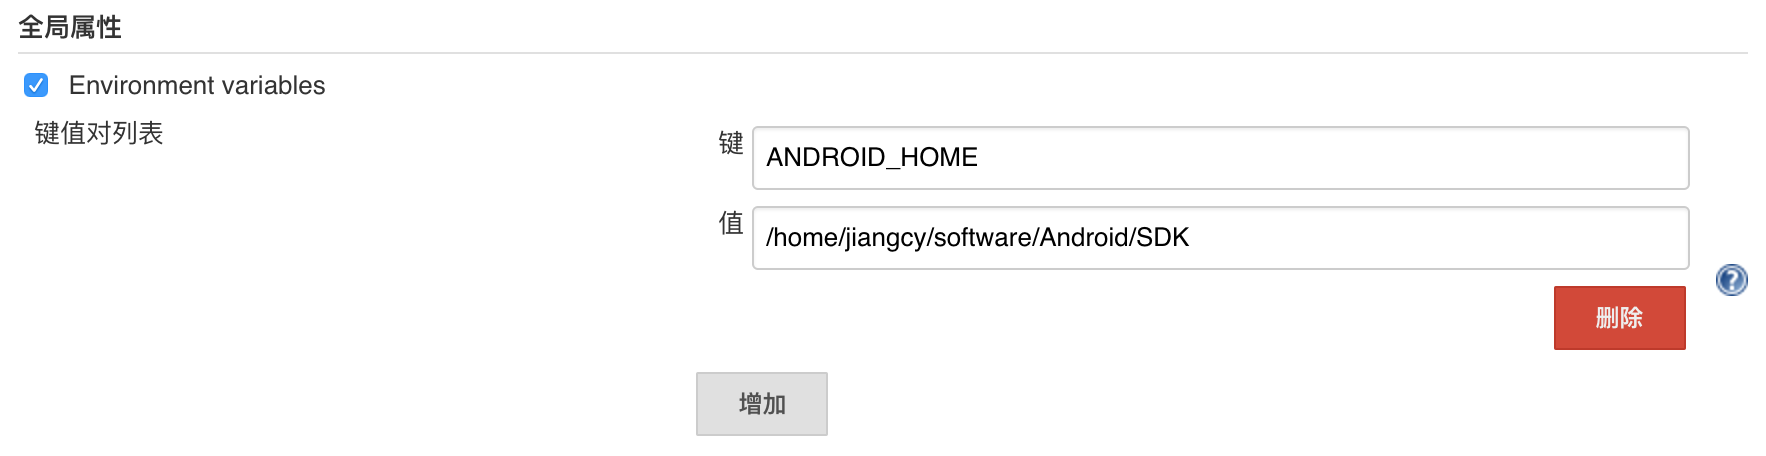 ANDROID_HOME